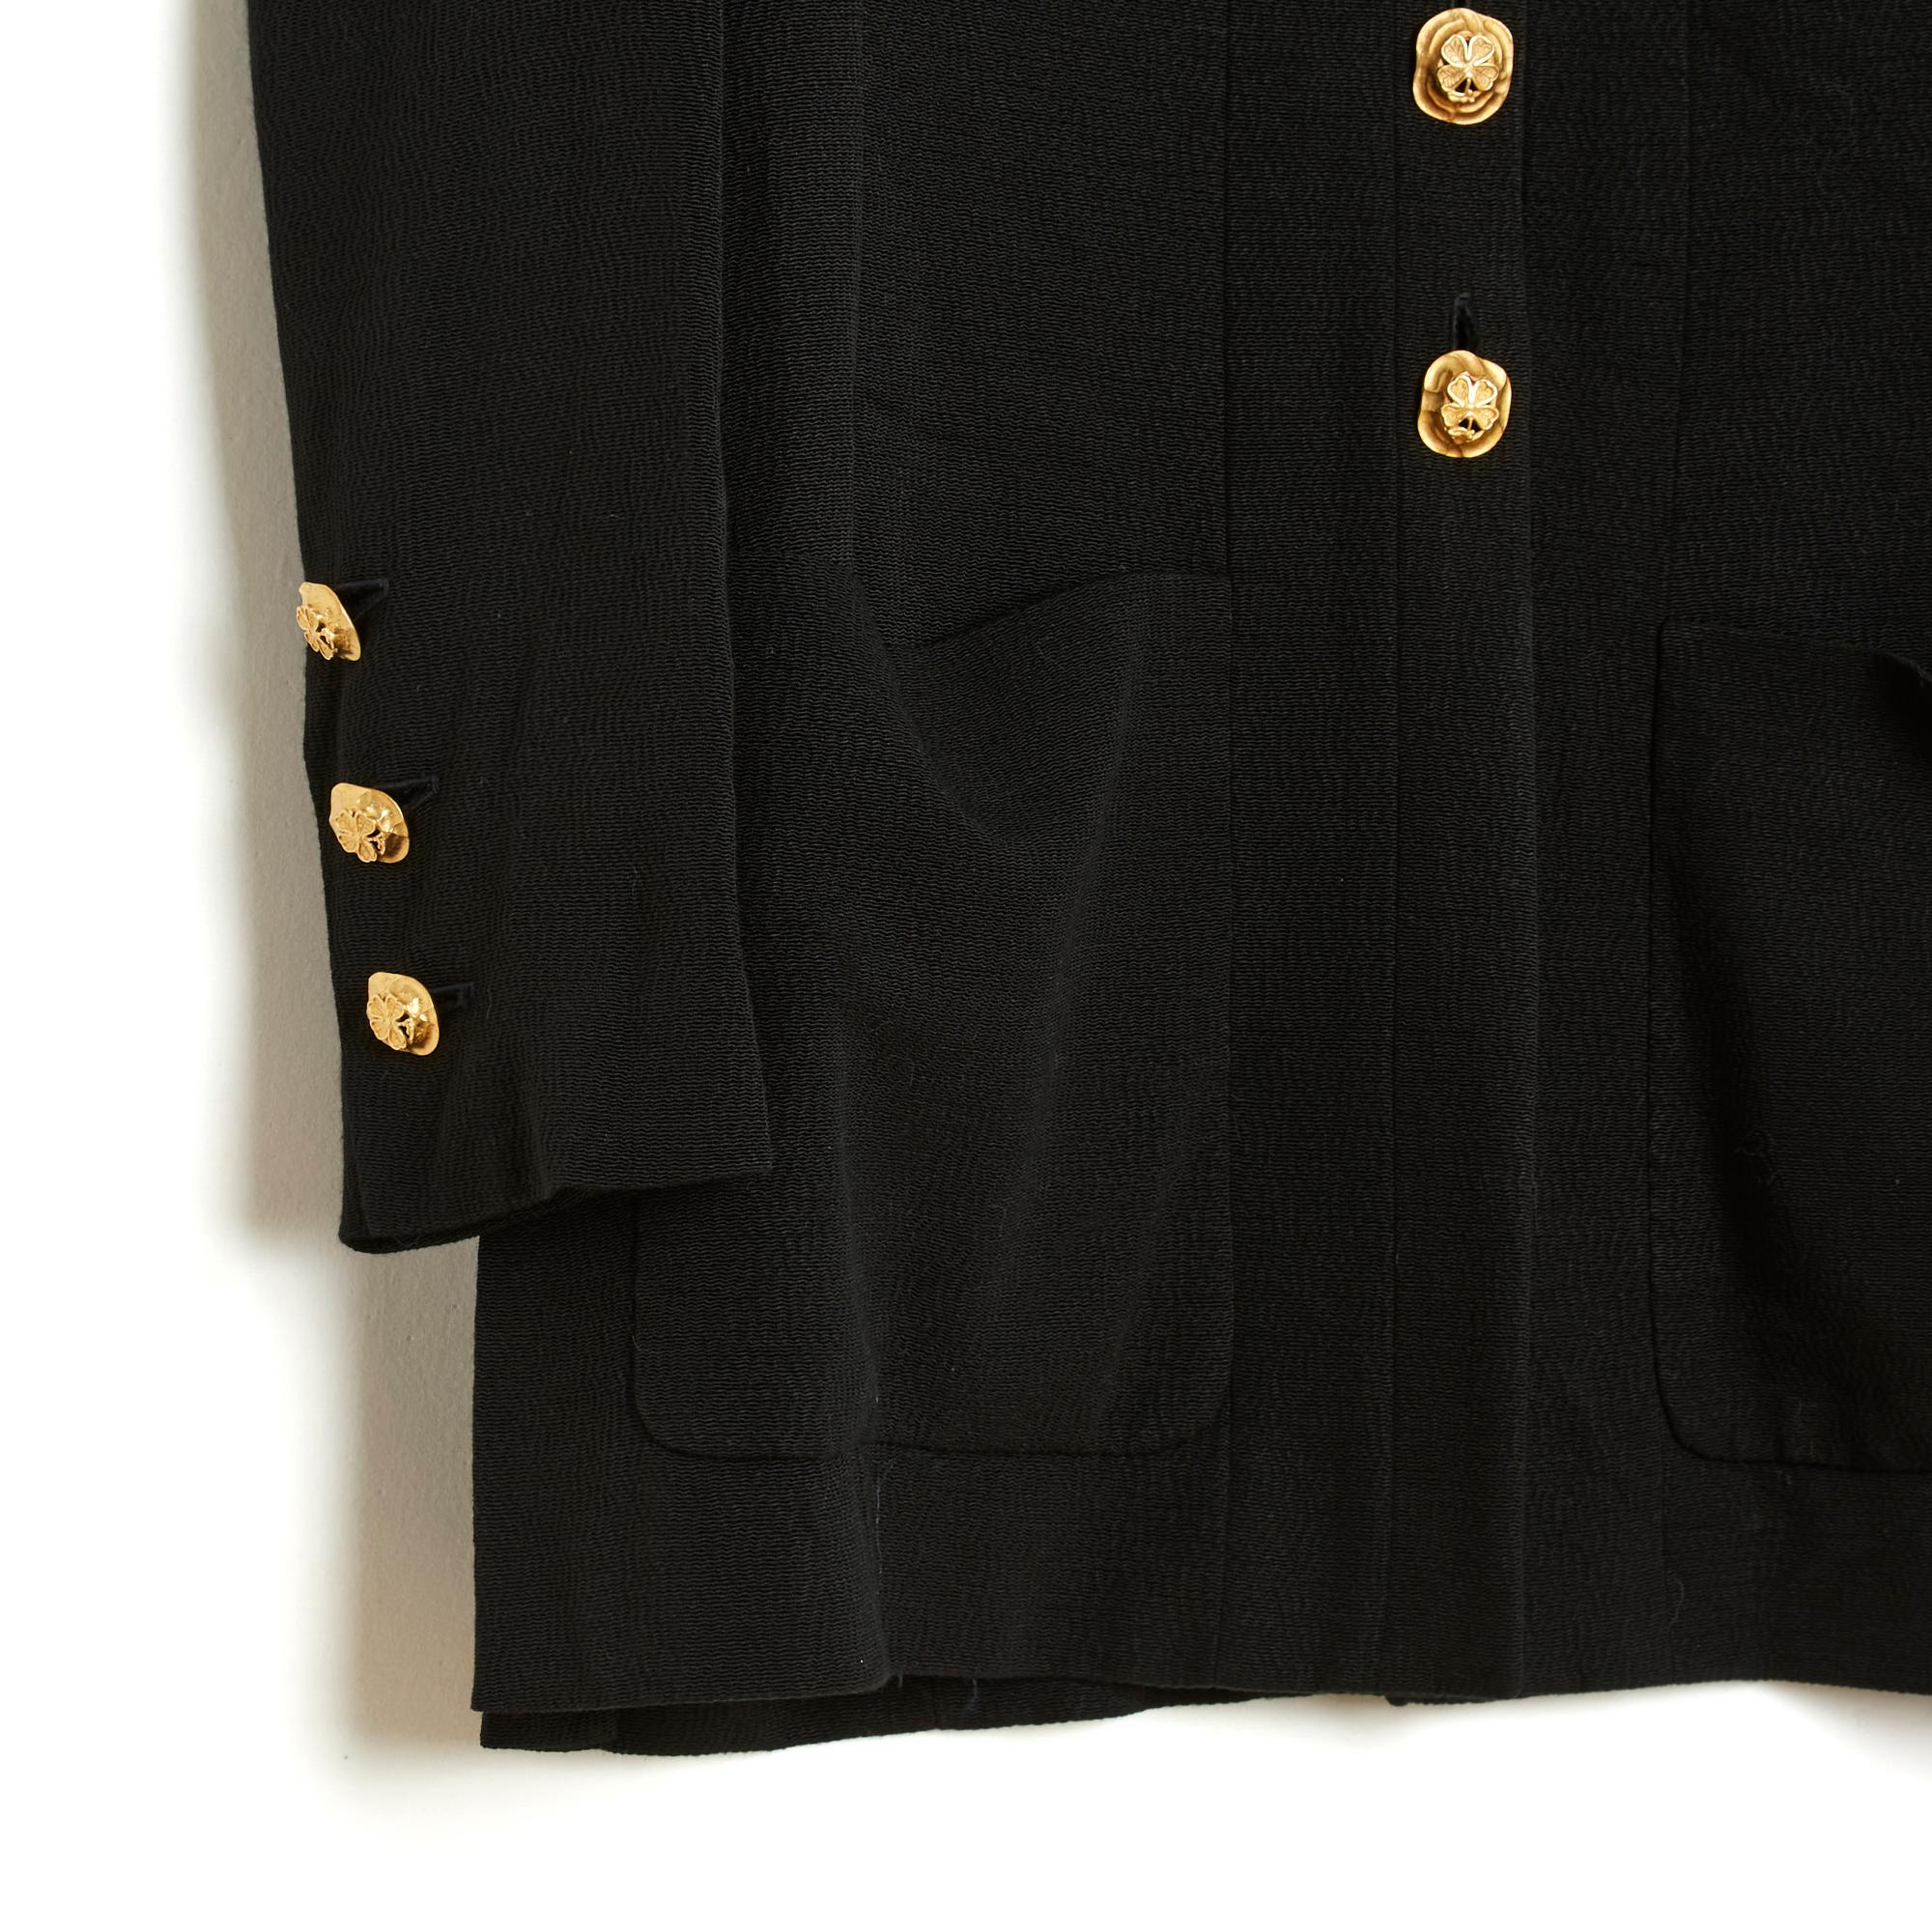 Chanel jacket from the Spring Summer 1993 collection in viscose blend crepe, V-neck closed with 4 jeweled buttons in front, 2 patch pockets on the bottom of the hips, 2 slits on each side of the jacket, long sleeves closed with 3 matching buttons,